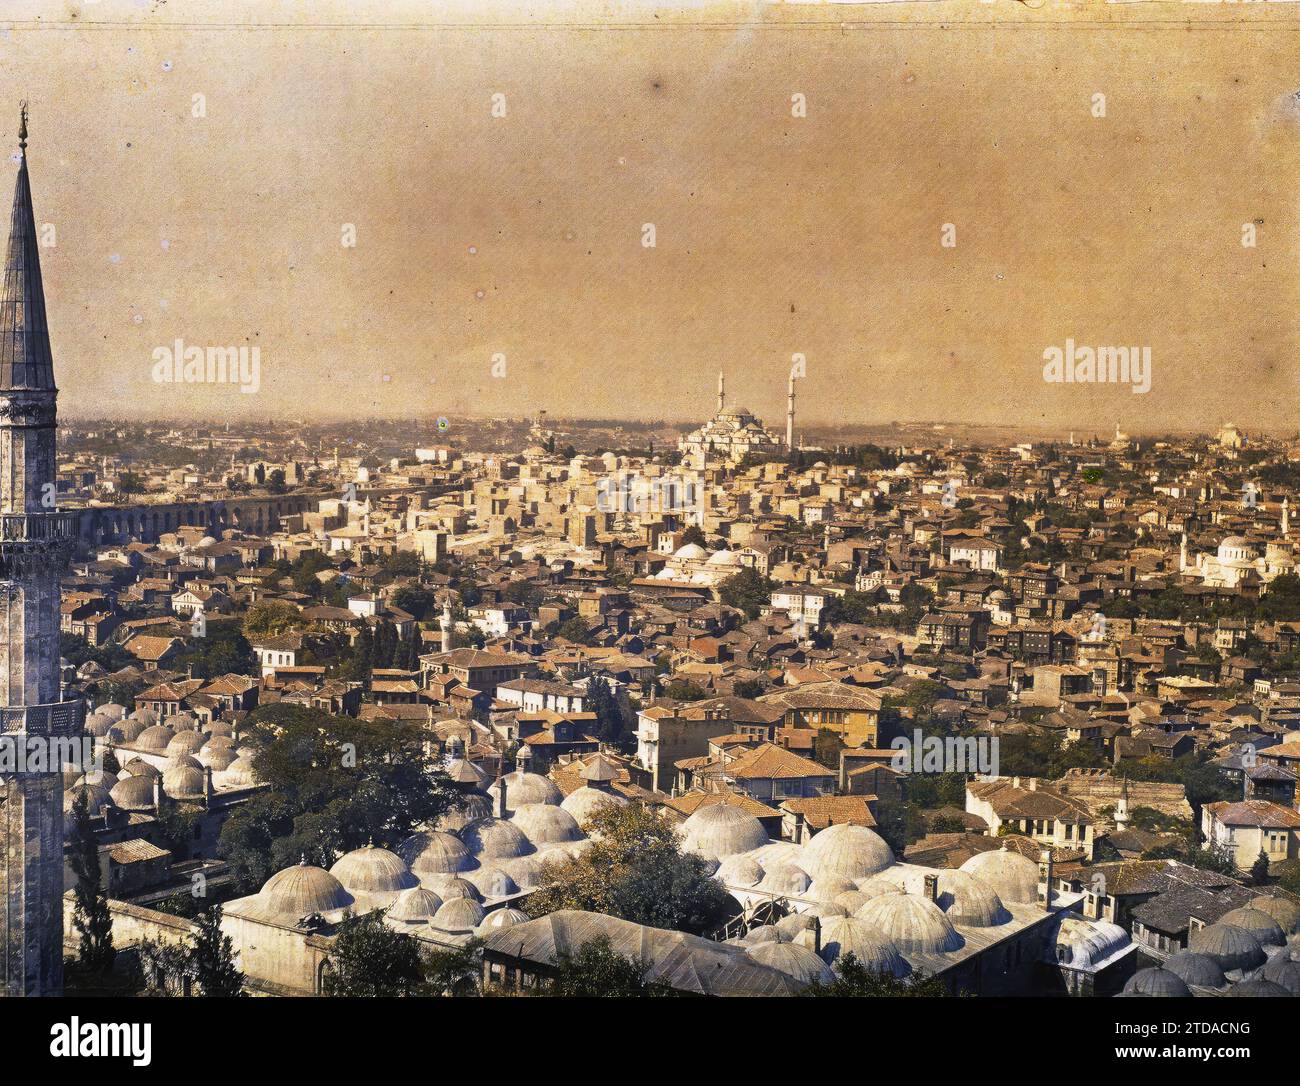 Constantinople (present-day Istanbul), Turkey Panorama taken from a minaret of the Süleymaniye Camii ('mosque of Sultan Suleiman the Magnificent') towards the west, Religion, Habitat, Architecture, Islam, Minaret, Aqueduct, Hydraulic installation, Cupola, dome, Mosque, Urban panorama, Religious architecture, Istanbul, 01/09/1912 - 30/09/1912, Passet, Stéphane, photographer, 1912 - Turquie - Stéphane Passet - (September), Autochrome, photo, Glass, Autochrome, photo, Positive, Horizontal, Size 9 x 12 cm Stock Photo